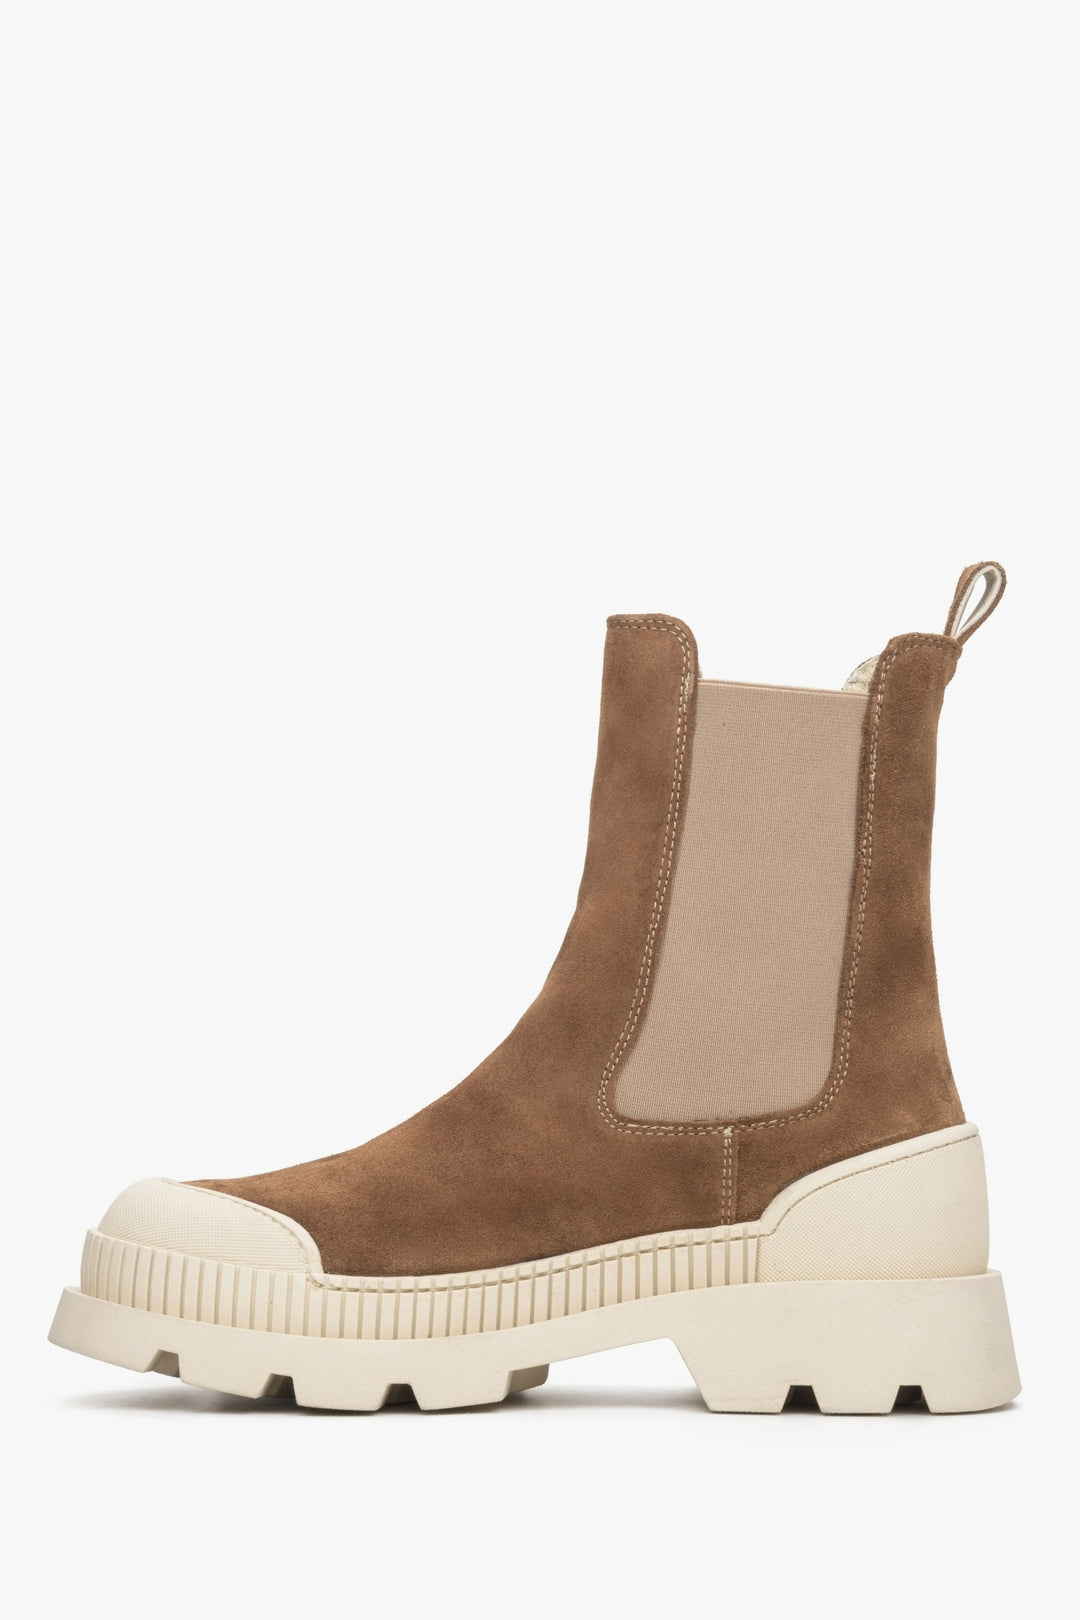 Brown and beige Estro women's Chelsea boots in velour and genuine leather - shoe profile.